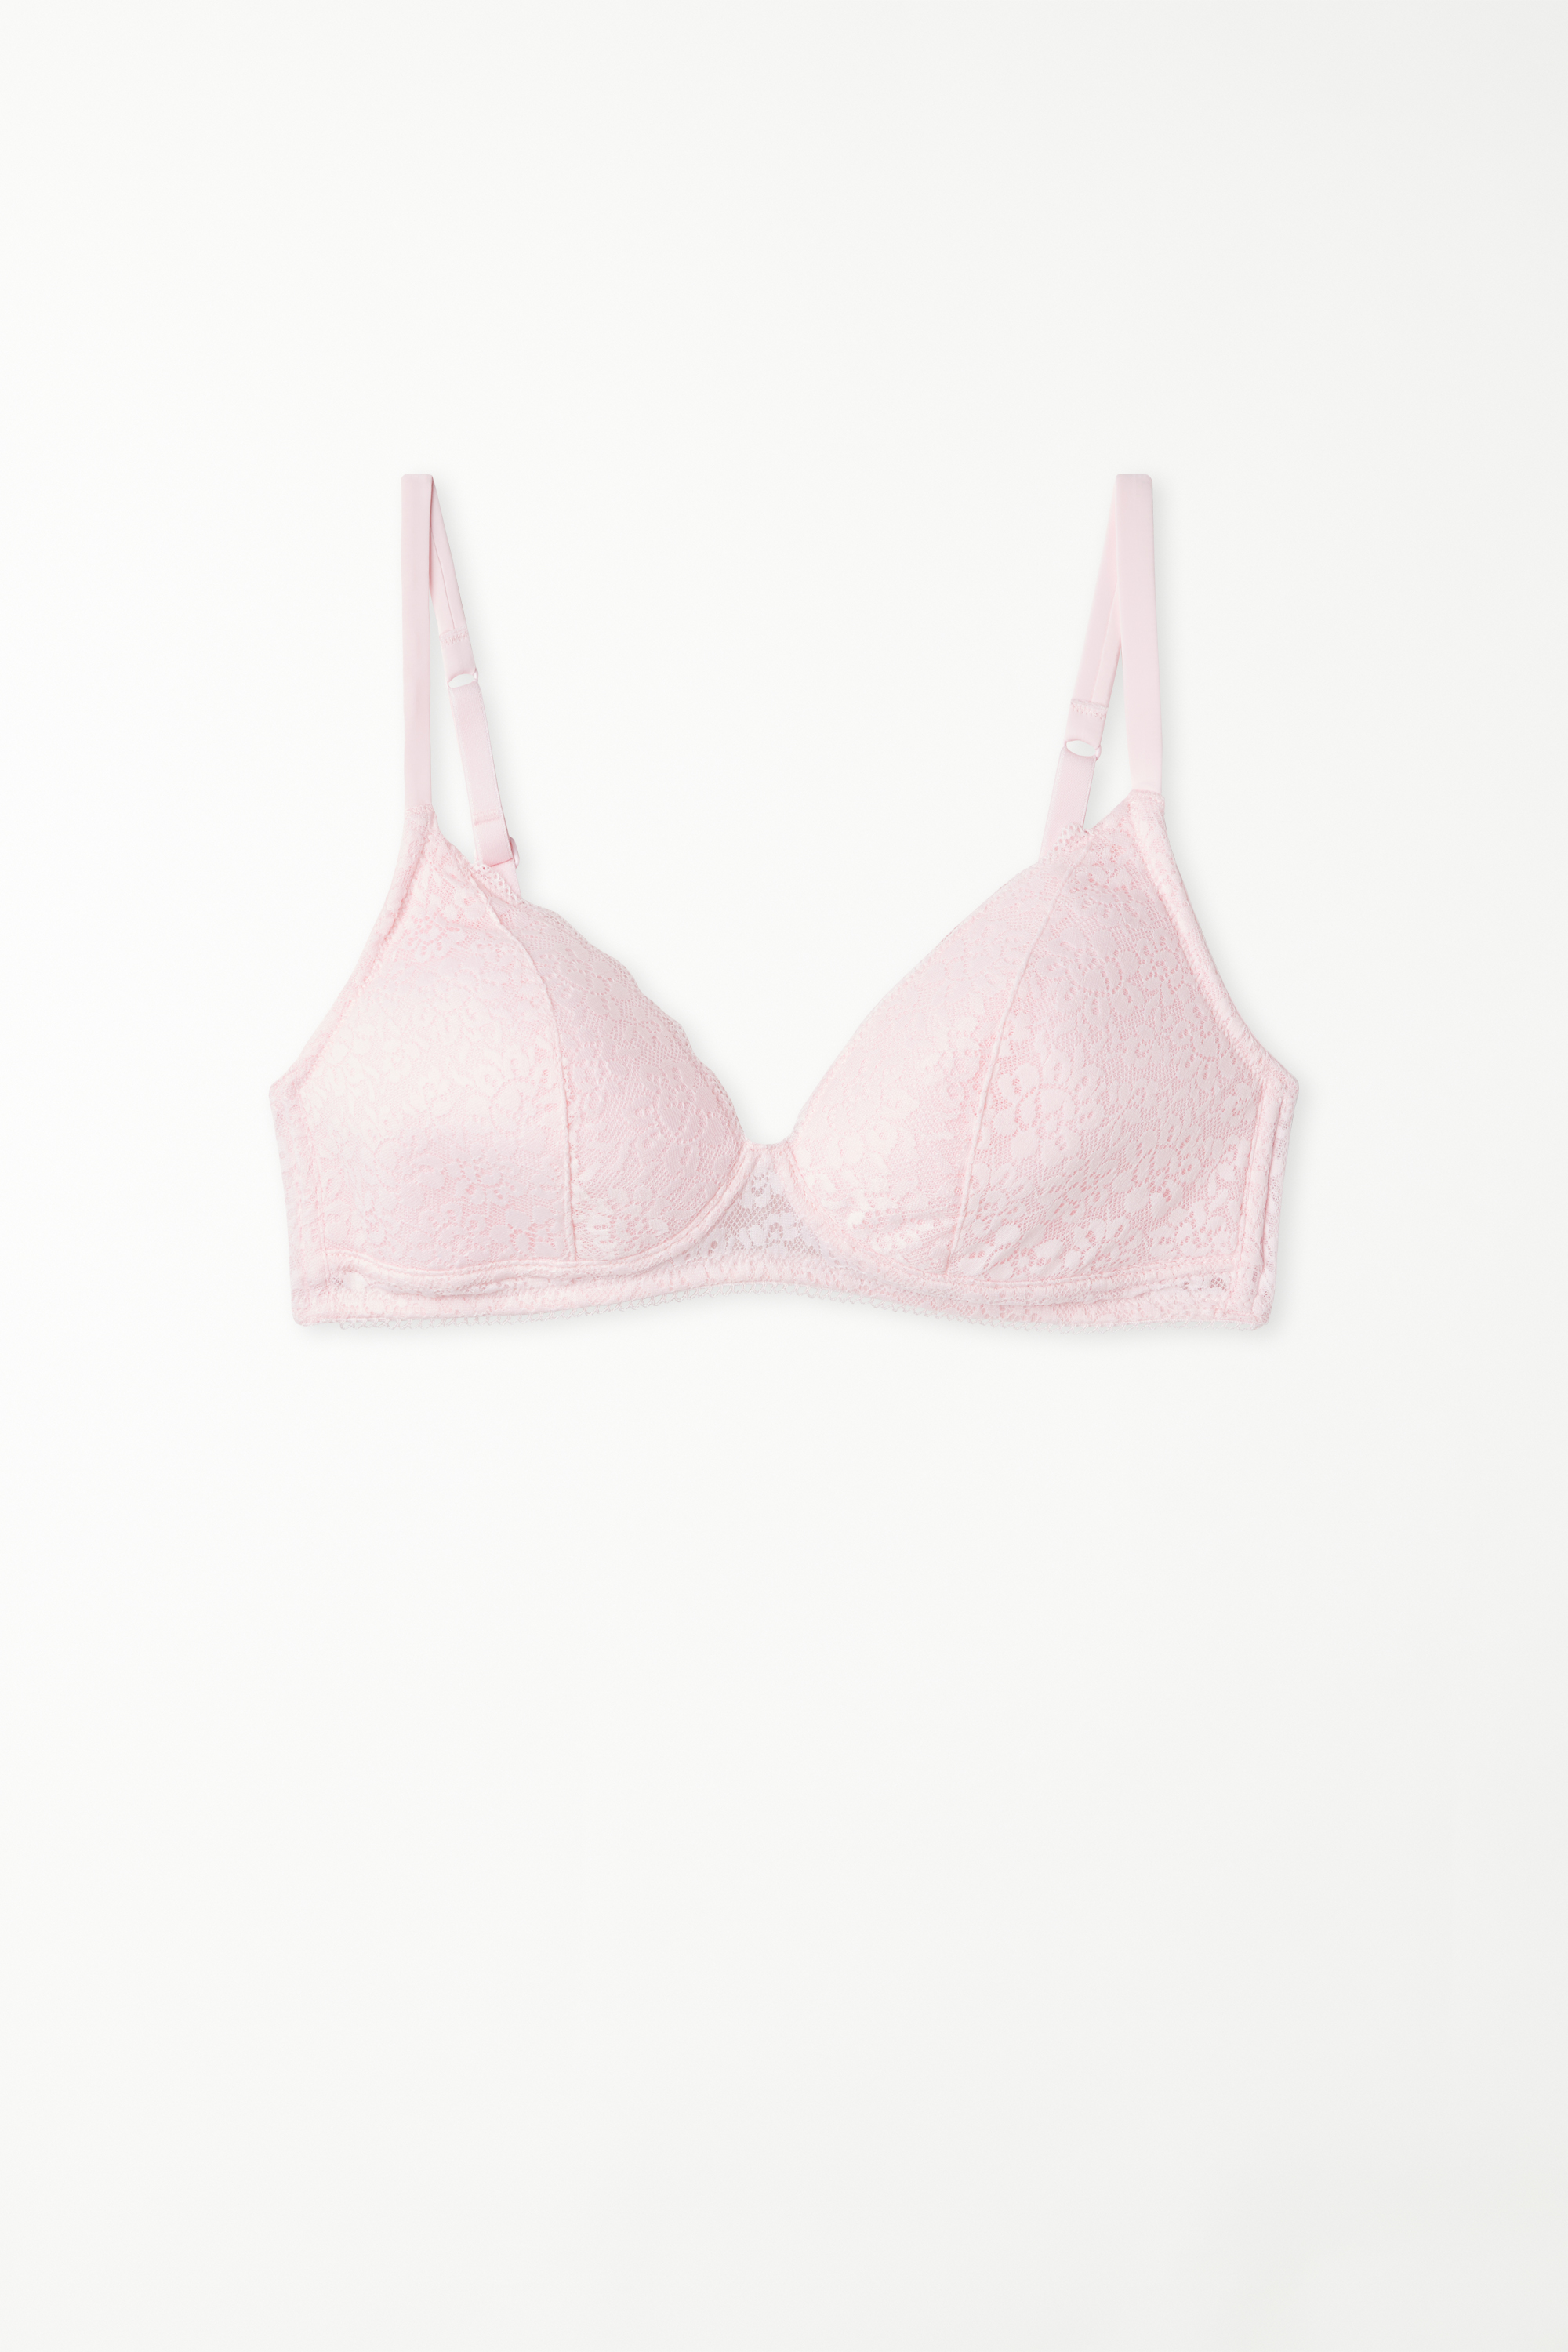 Warsaw Lightly Padded Lace Triangle Bra